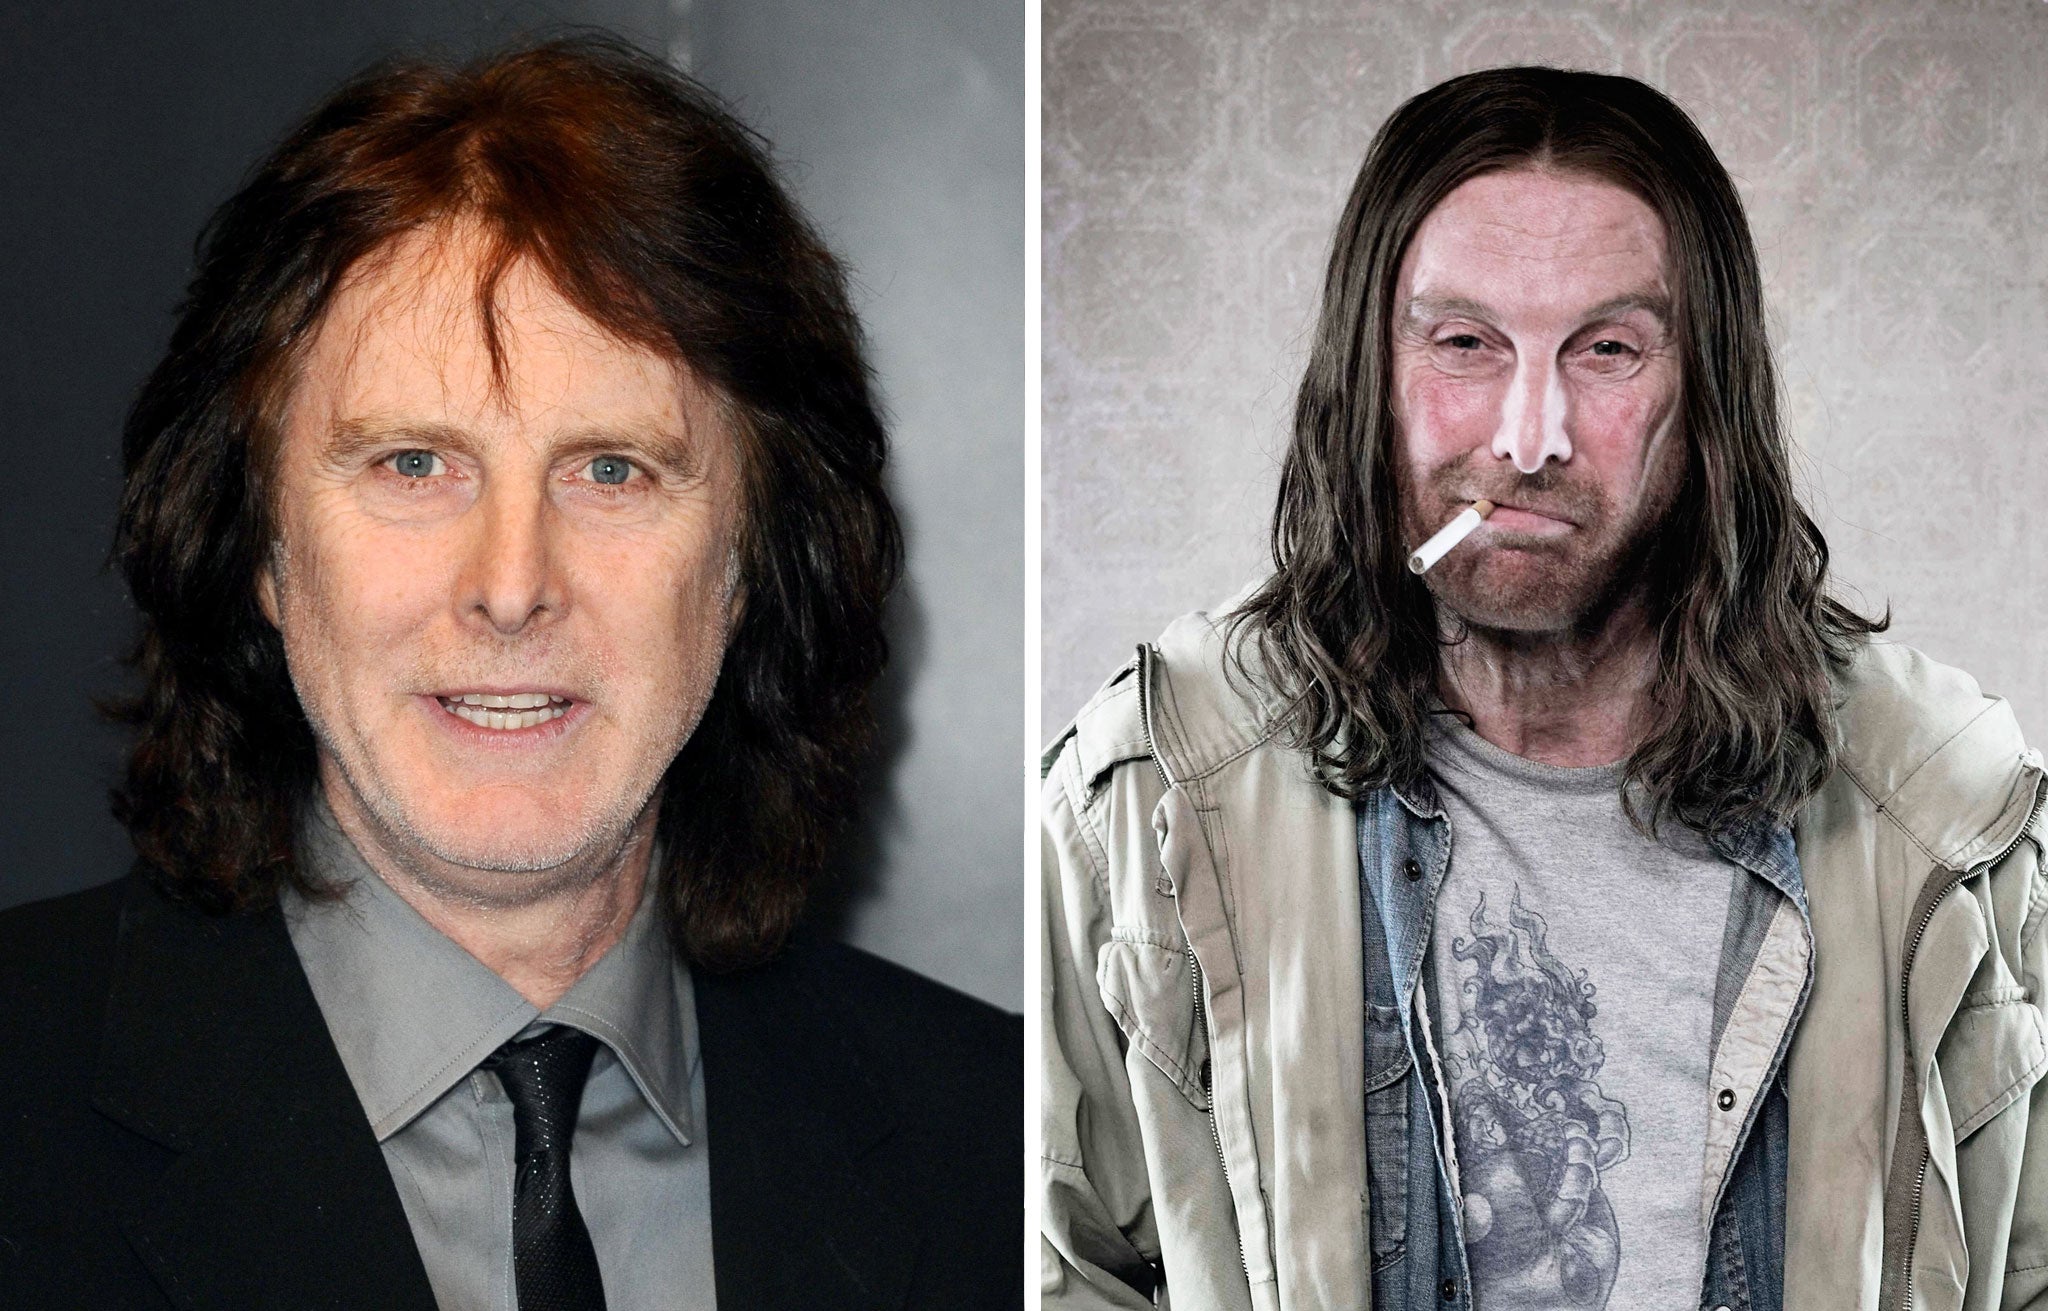 David Threlfall is to play a hard-working detective in a new BBC serial - his first role following his long running stint as dodgy layabout Frank Gallagher in Shameless.